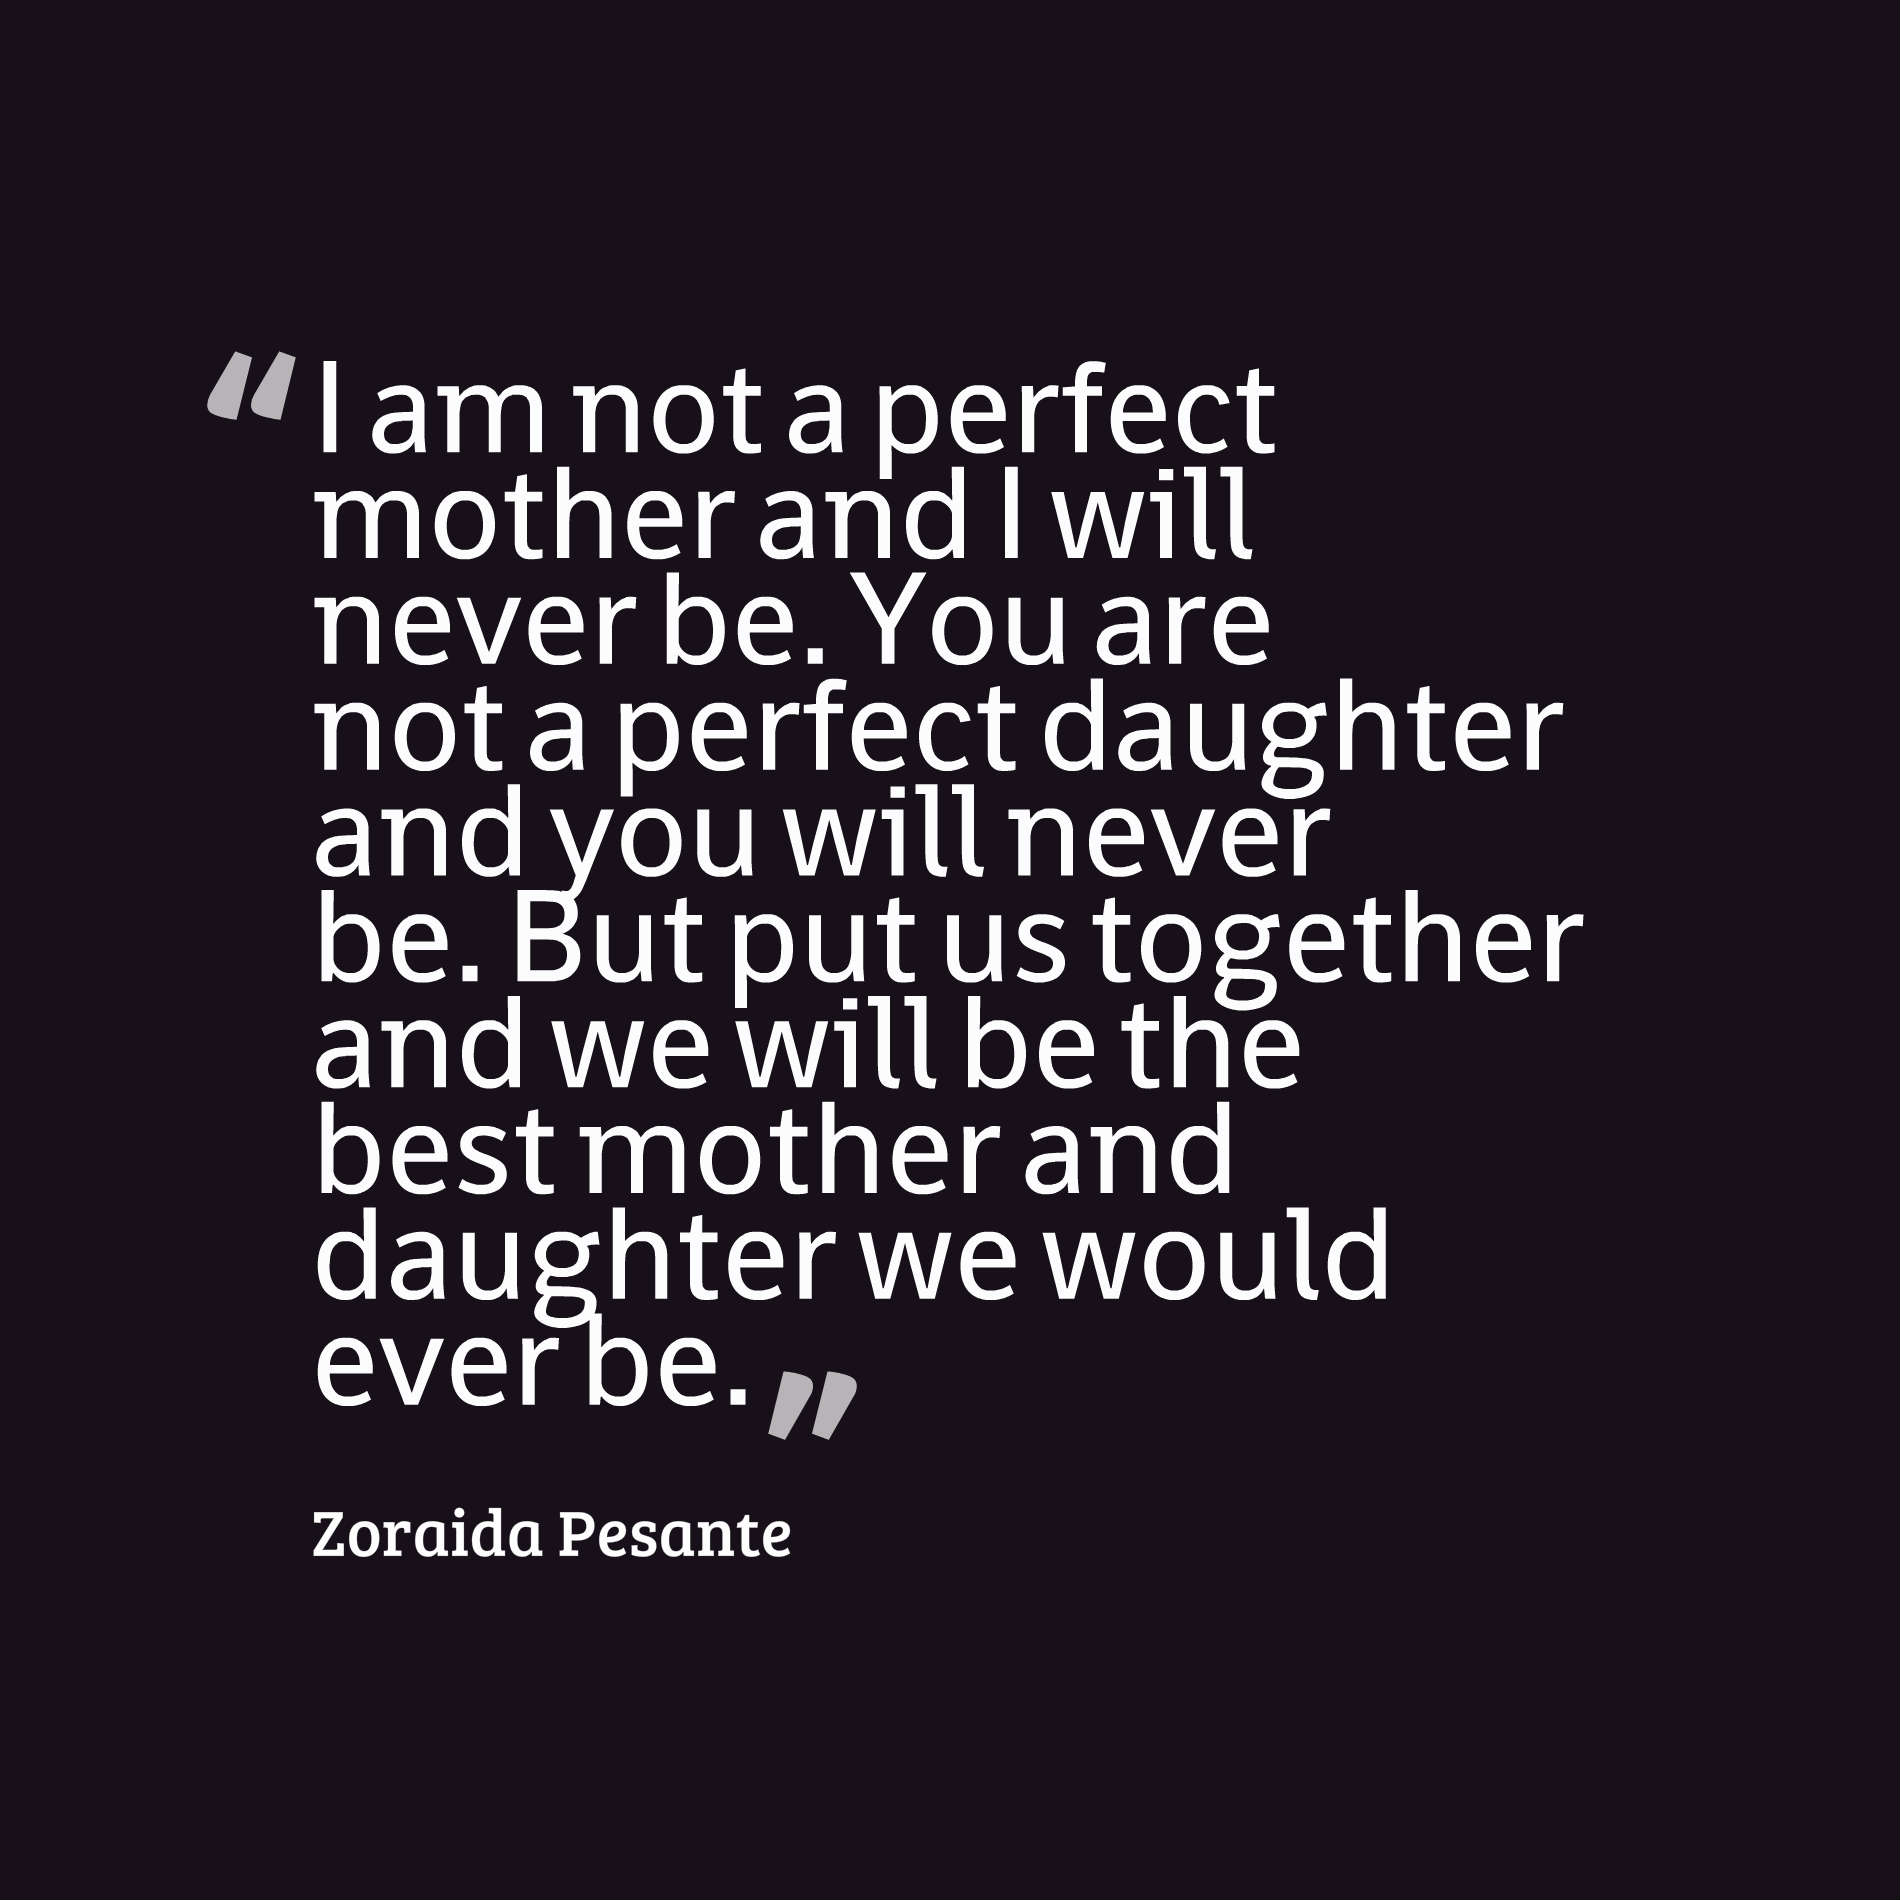 I am not a perfect mother and I will never be. You are not a perfect daughter and you will never be. But put us together and we will be the best mother and daughter we would ever be.